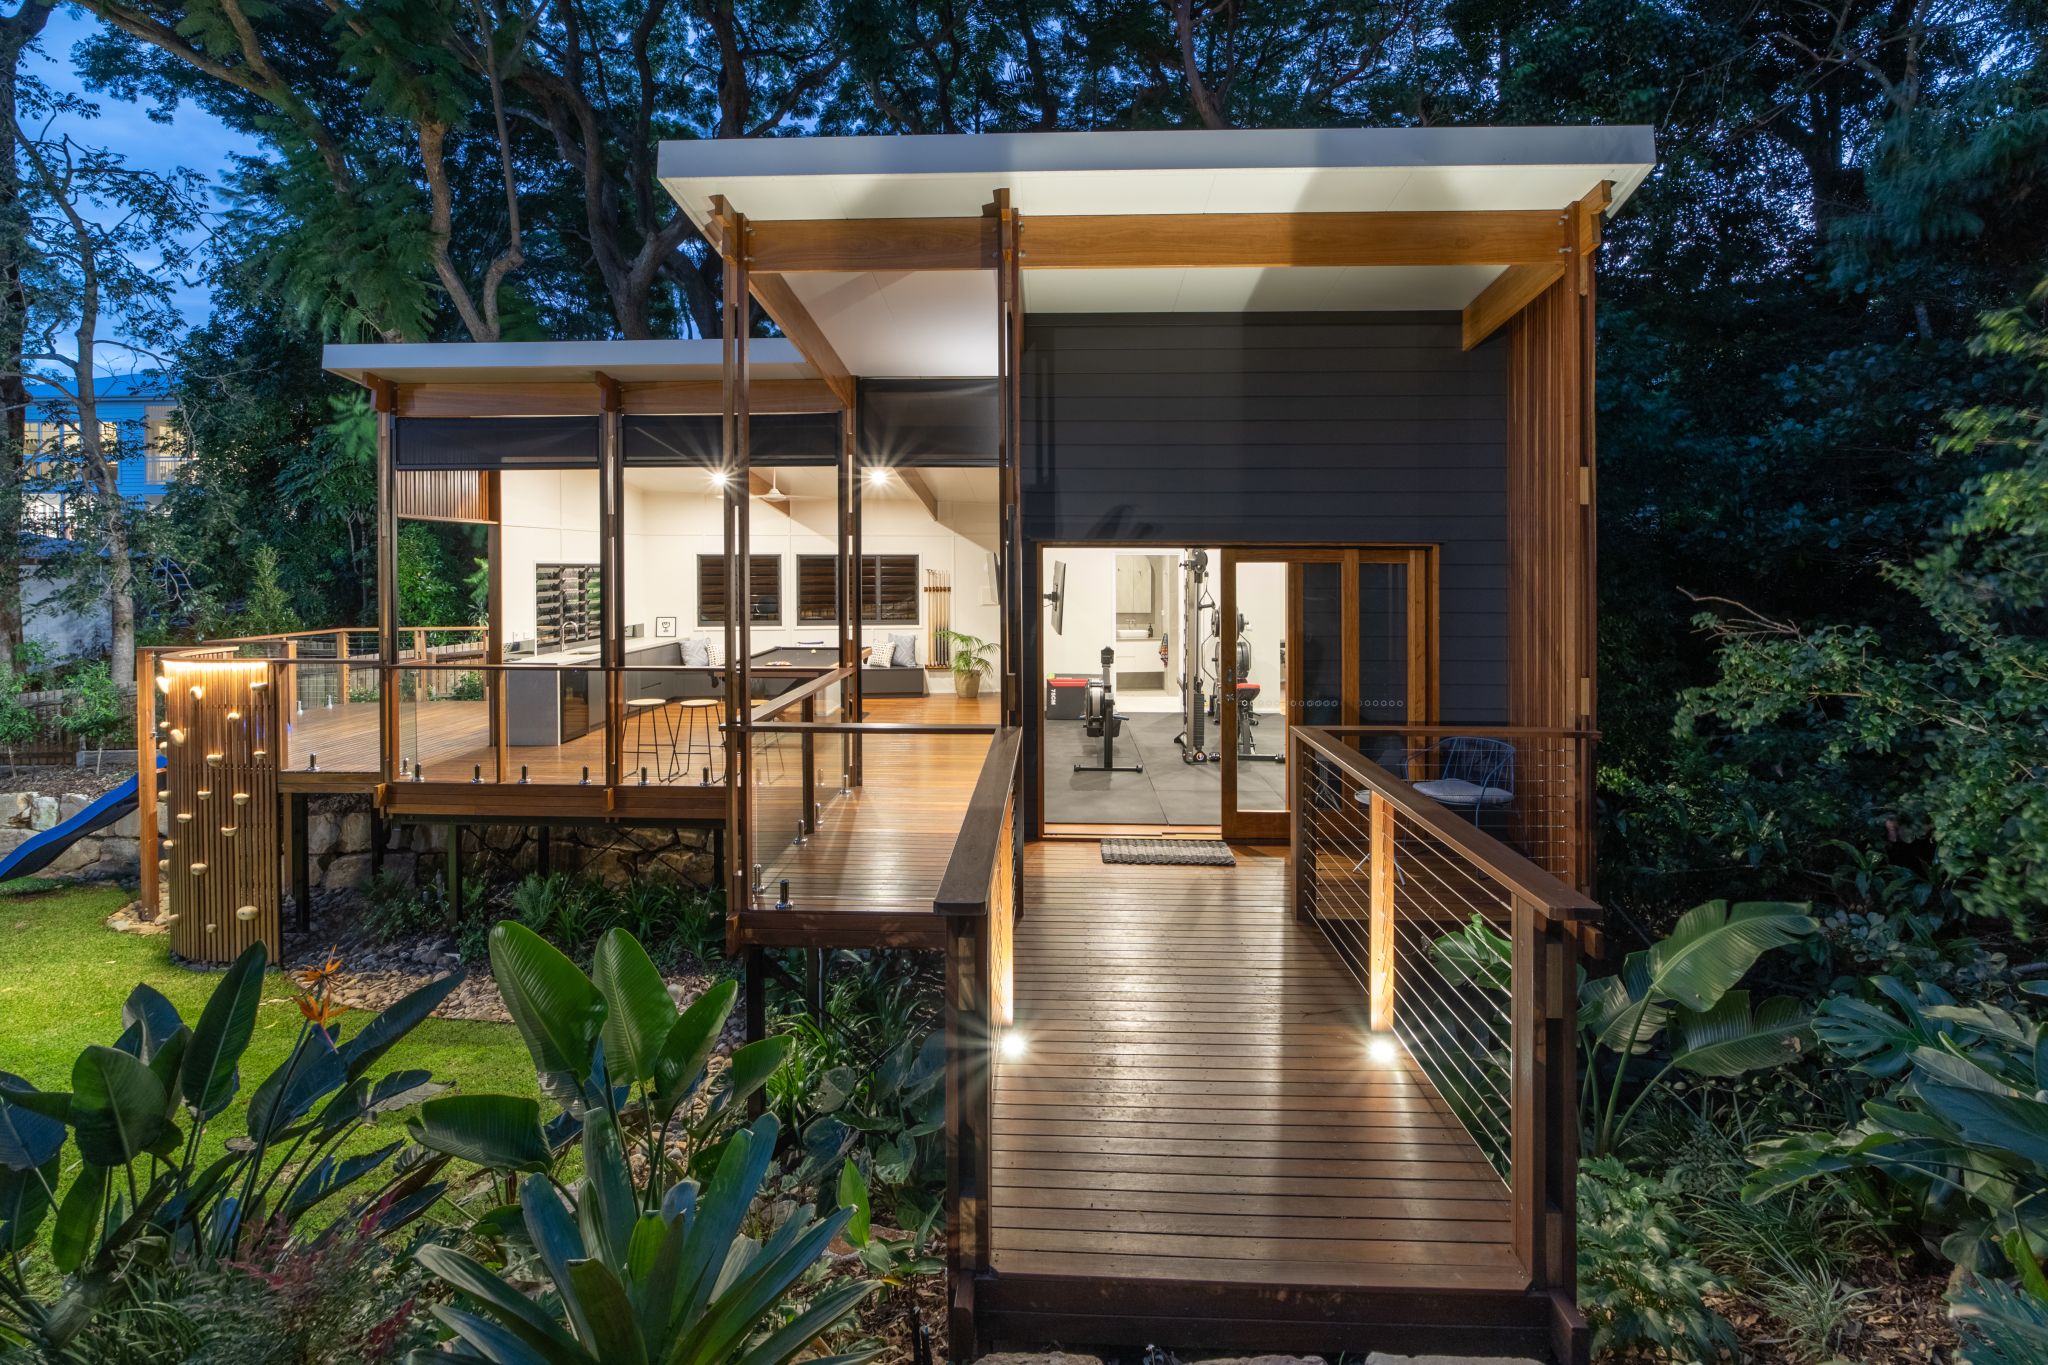 A modern house during twilight, featuring a wooden deck with EnduroShield-treated glass railings, reflecting the warm glow of the interior lights. The house is surrounded by lush greenery, and the deck leads to an open-concept interior with visible gym equipment. The structure showcases a combination of dark grey siding, natural wood posts, and a white flat roof, harmoniously blending with the natural environment.